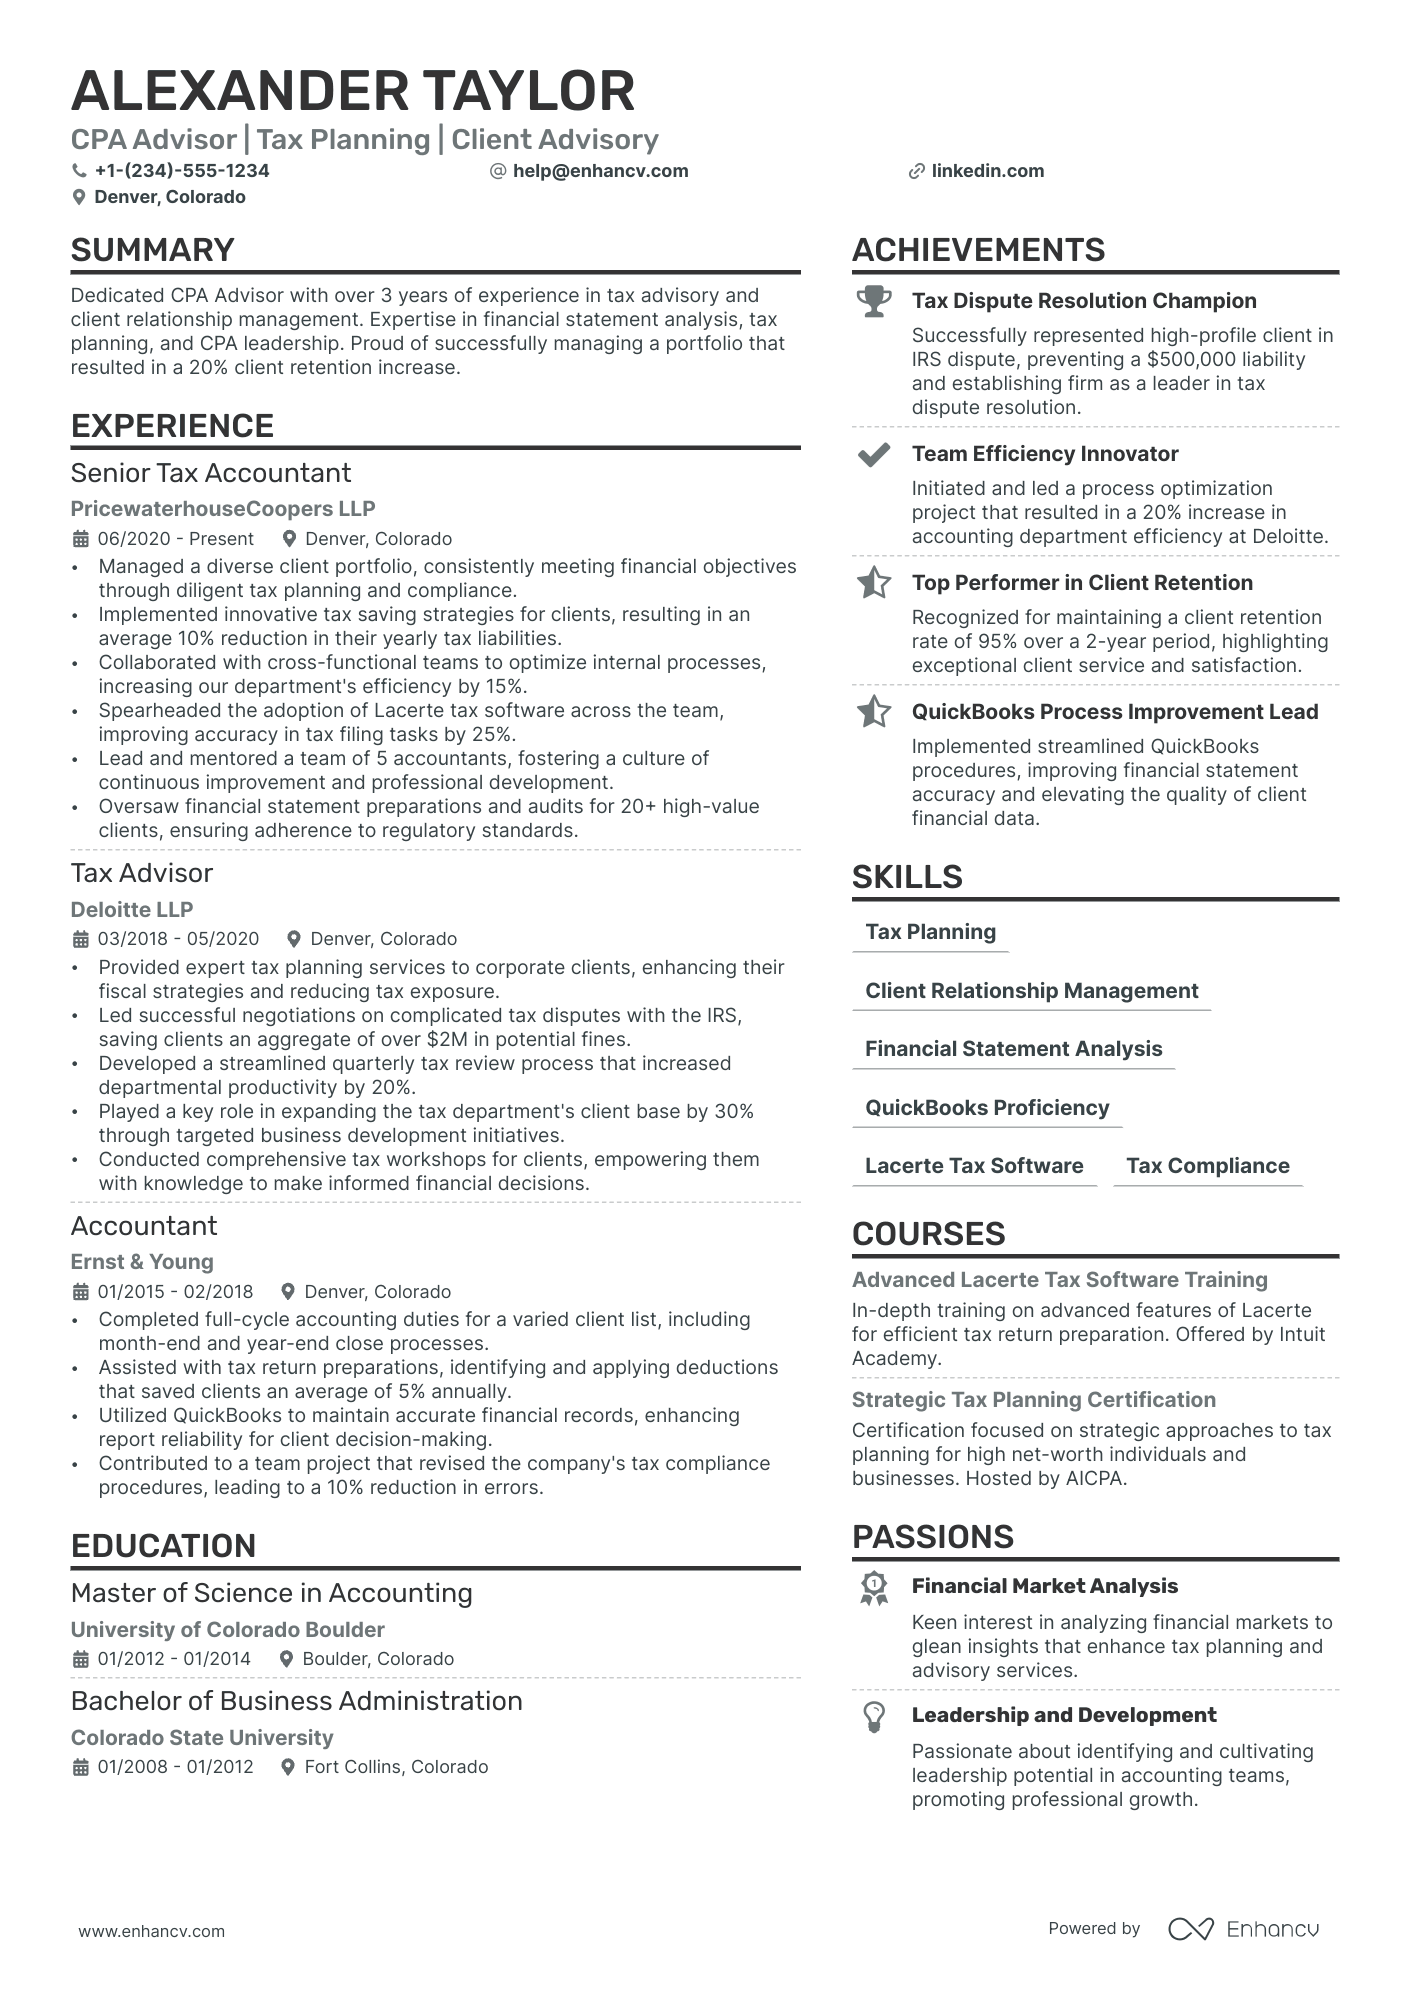 CPA resume example